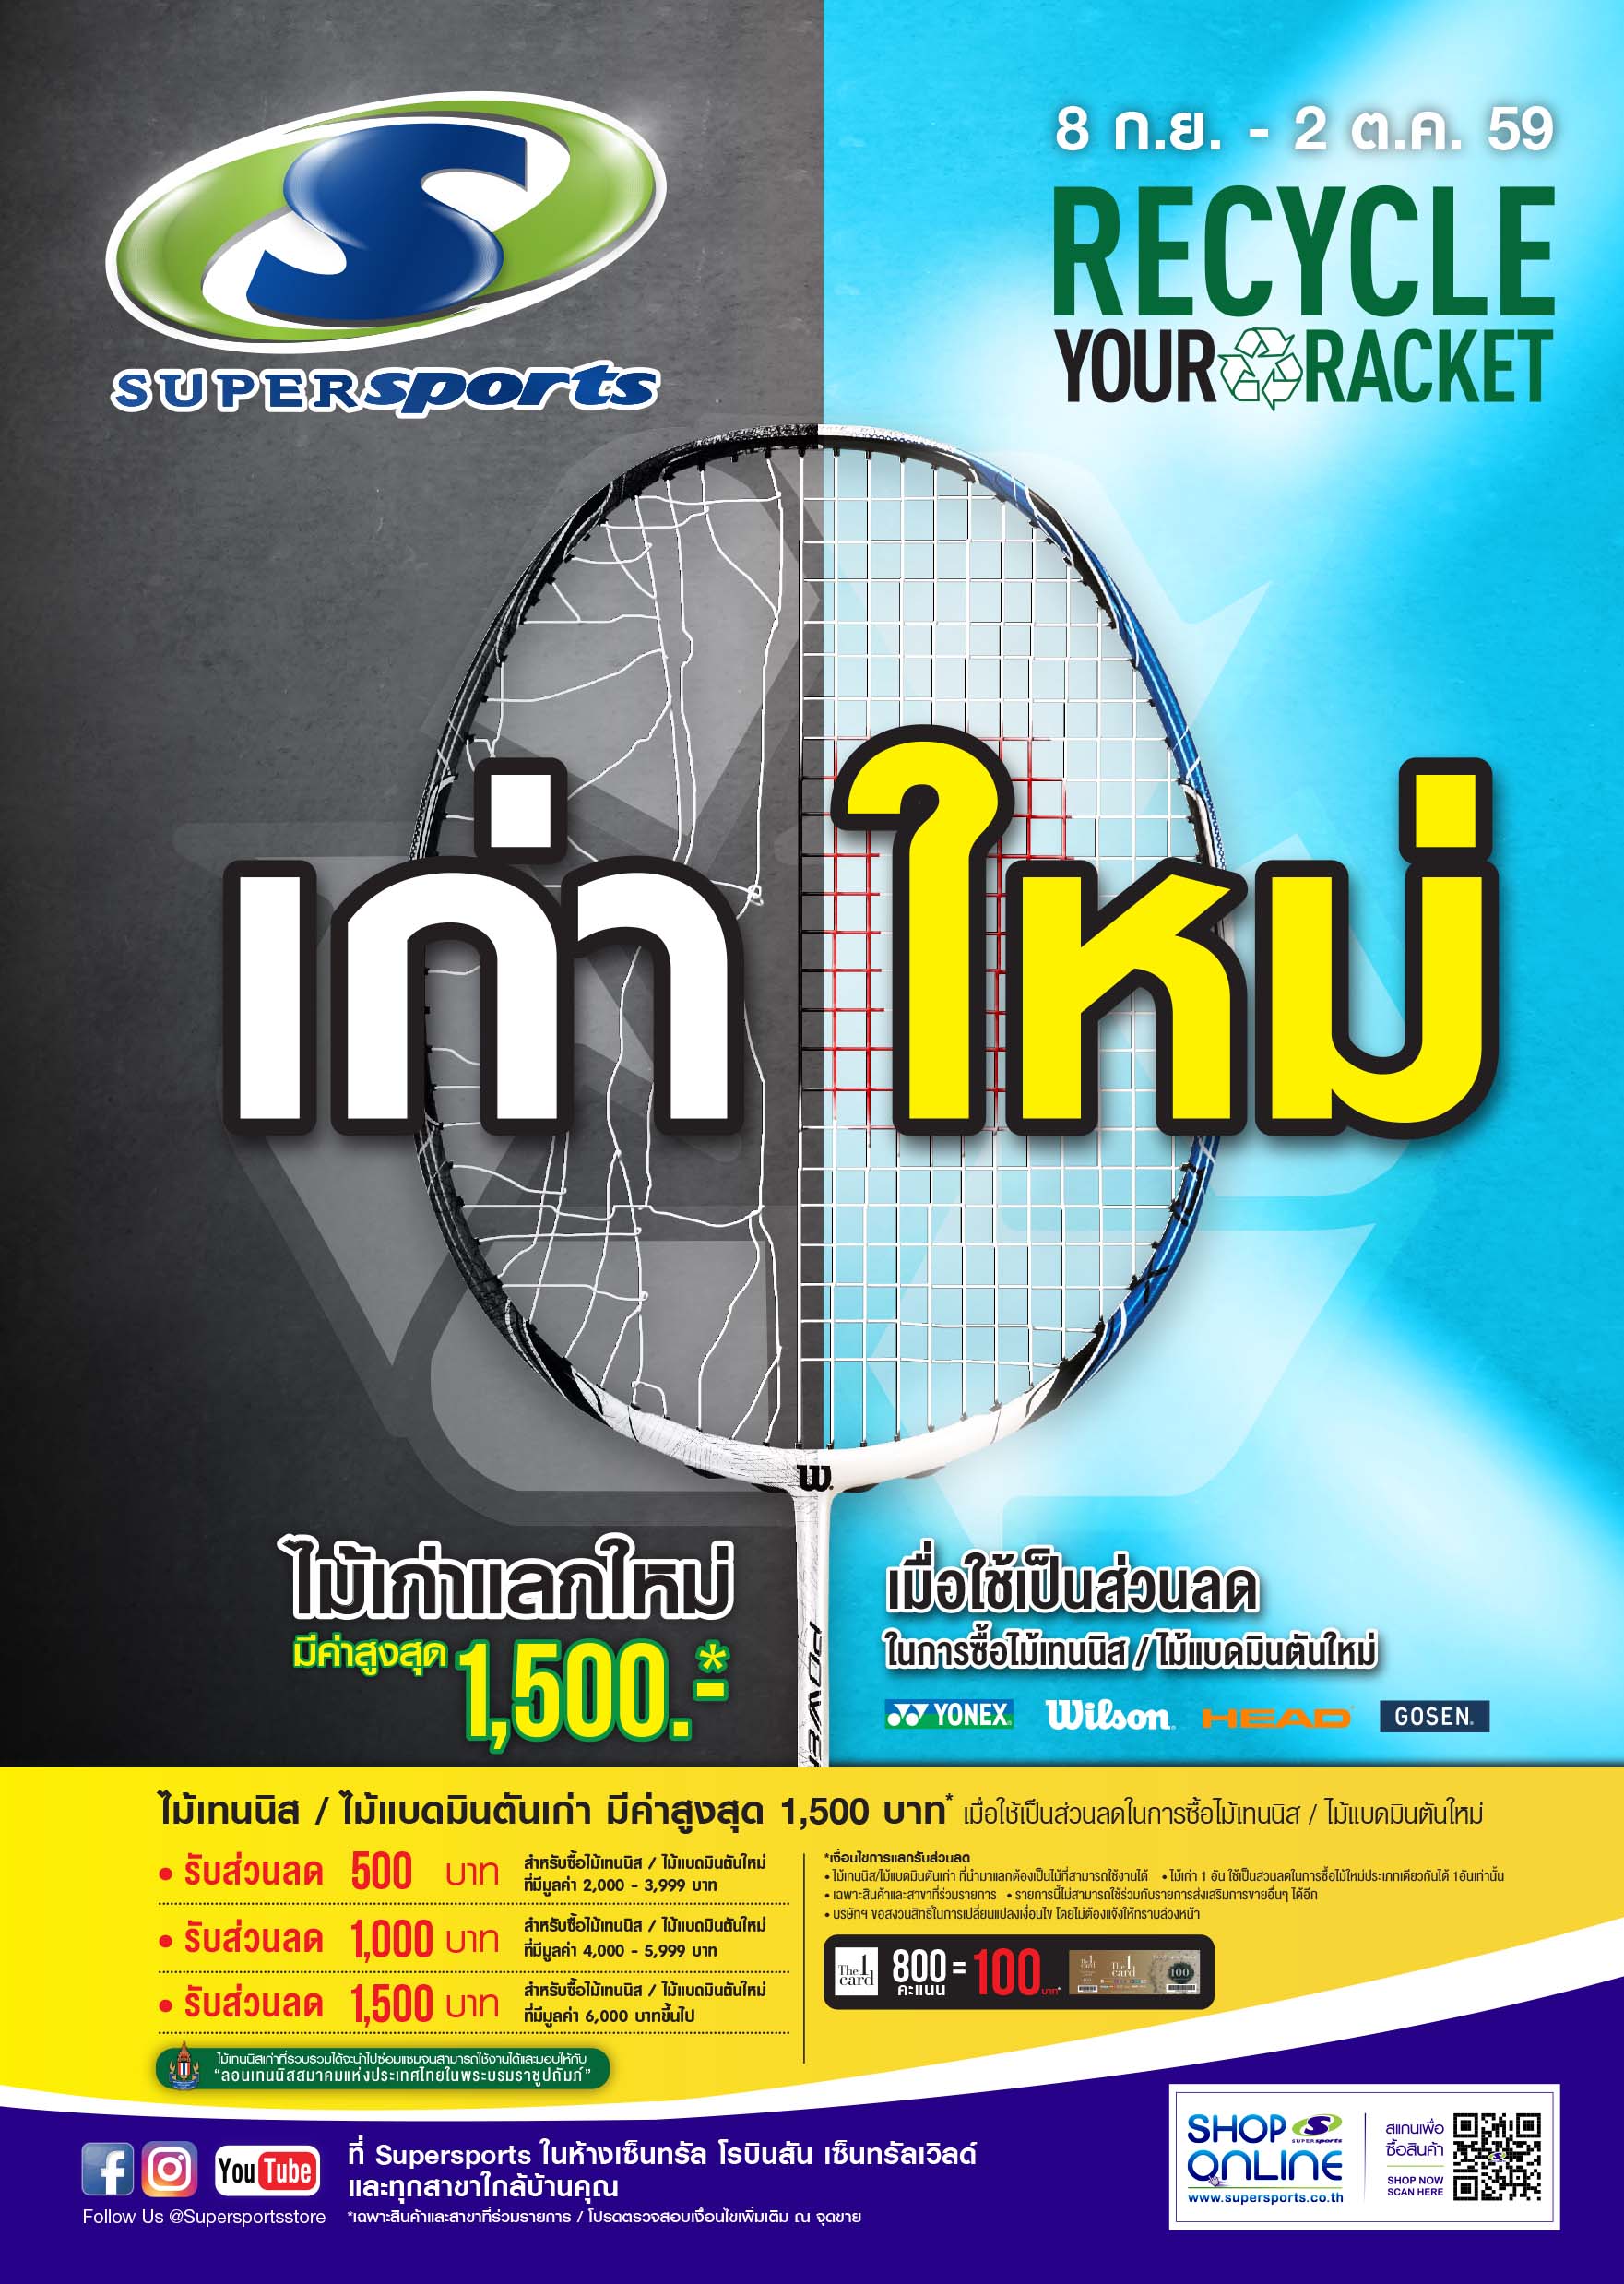 Recycle your Racket CRC Sports